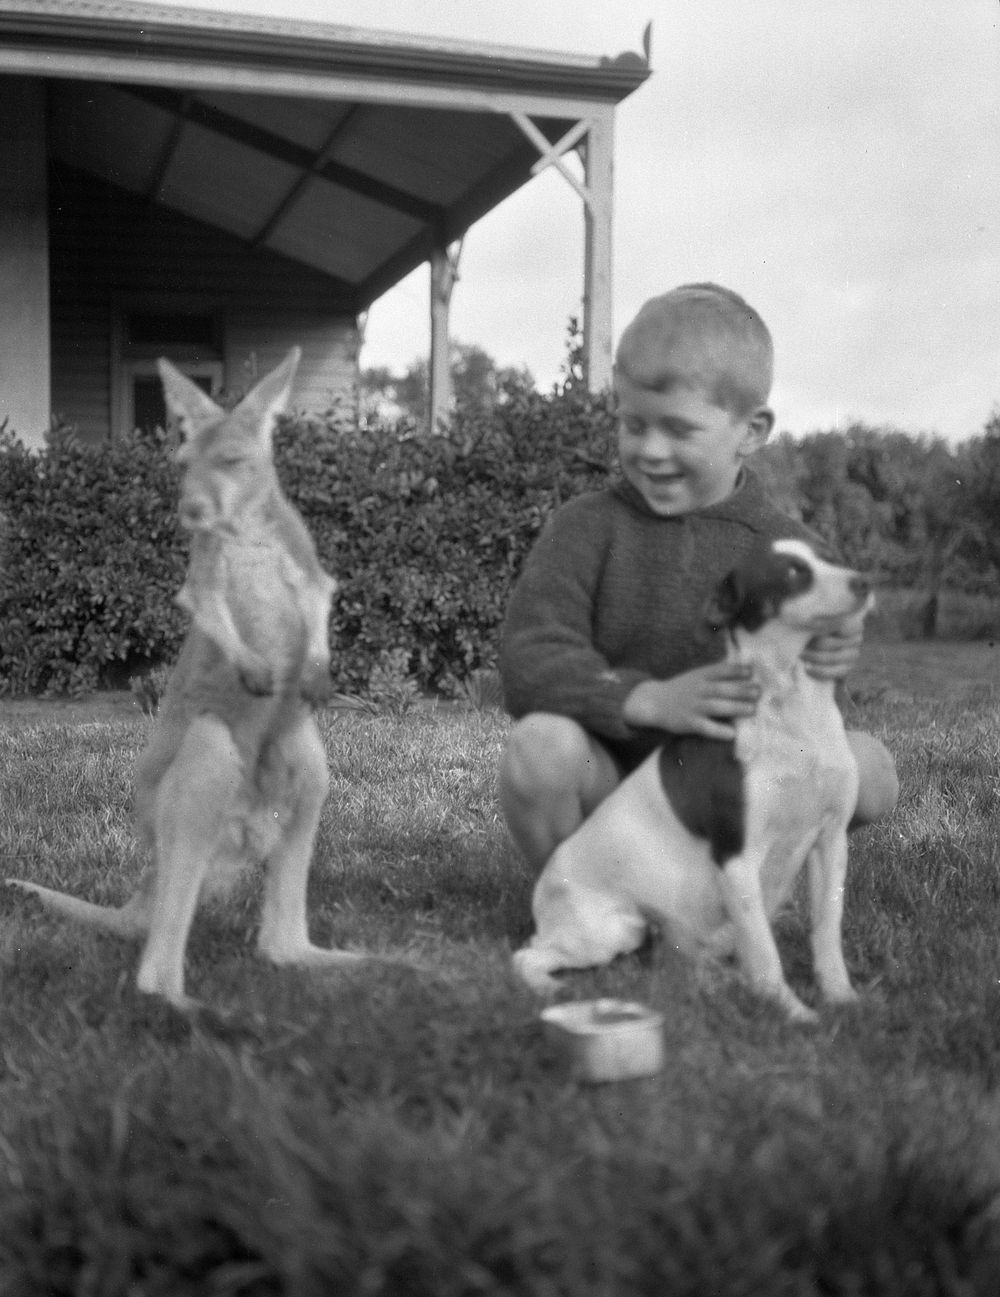 Young boy and animal friends.